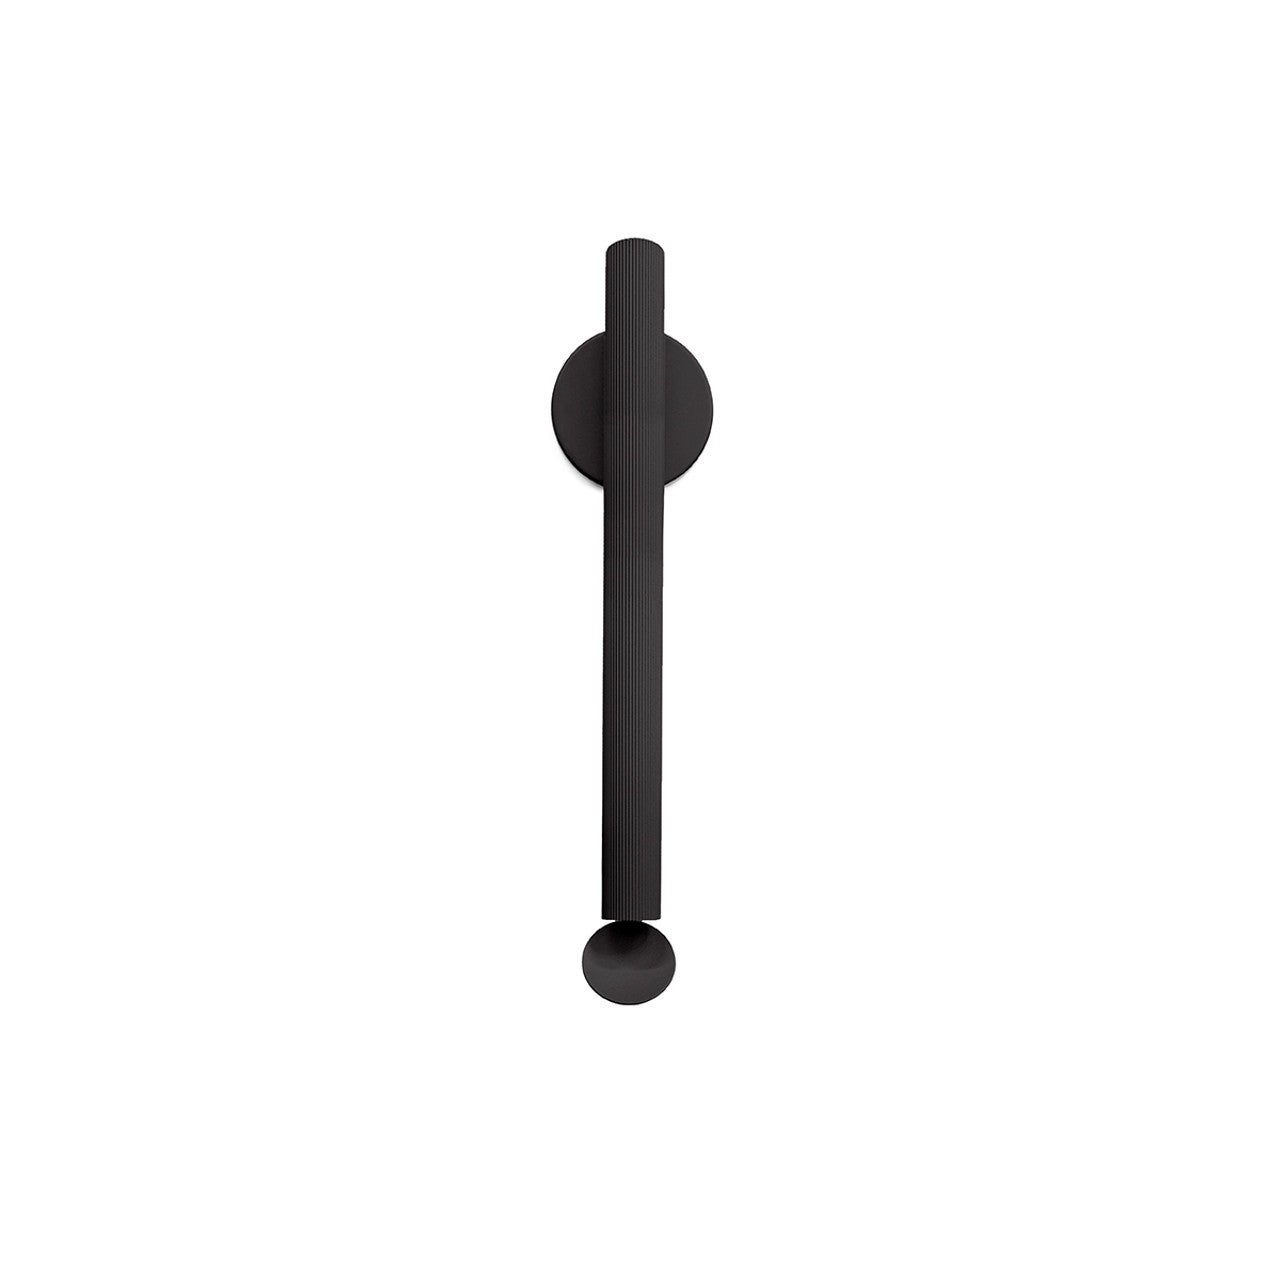 Flos Flauta Medium Indoor/Outdoor Wall Sconce in Anthracite by Patricia Urquiola For Sale